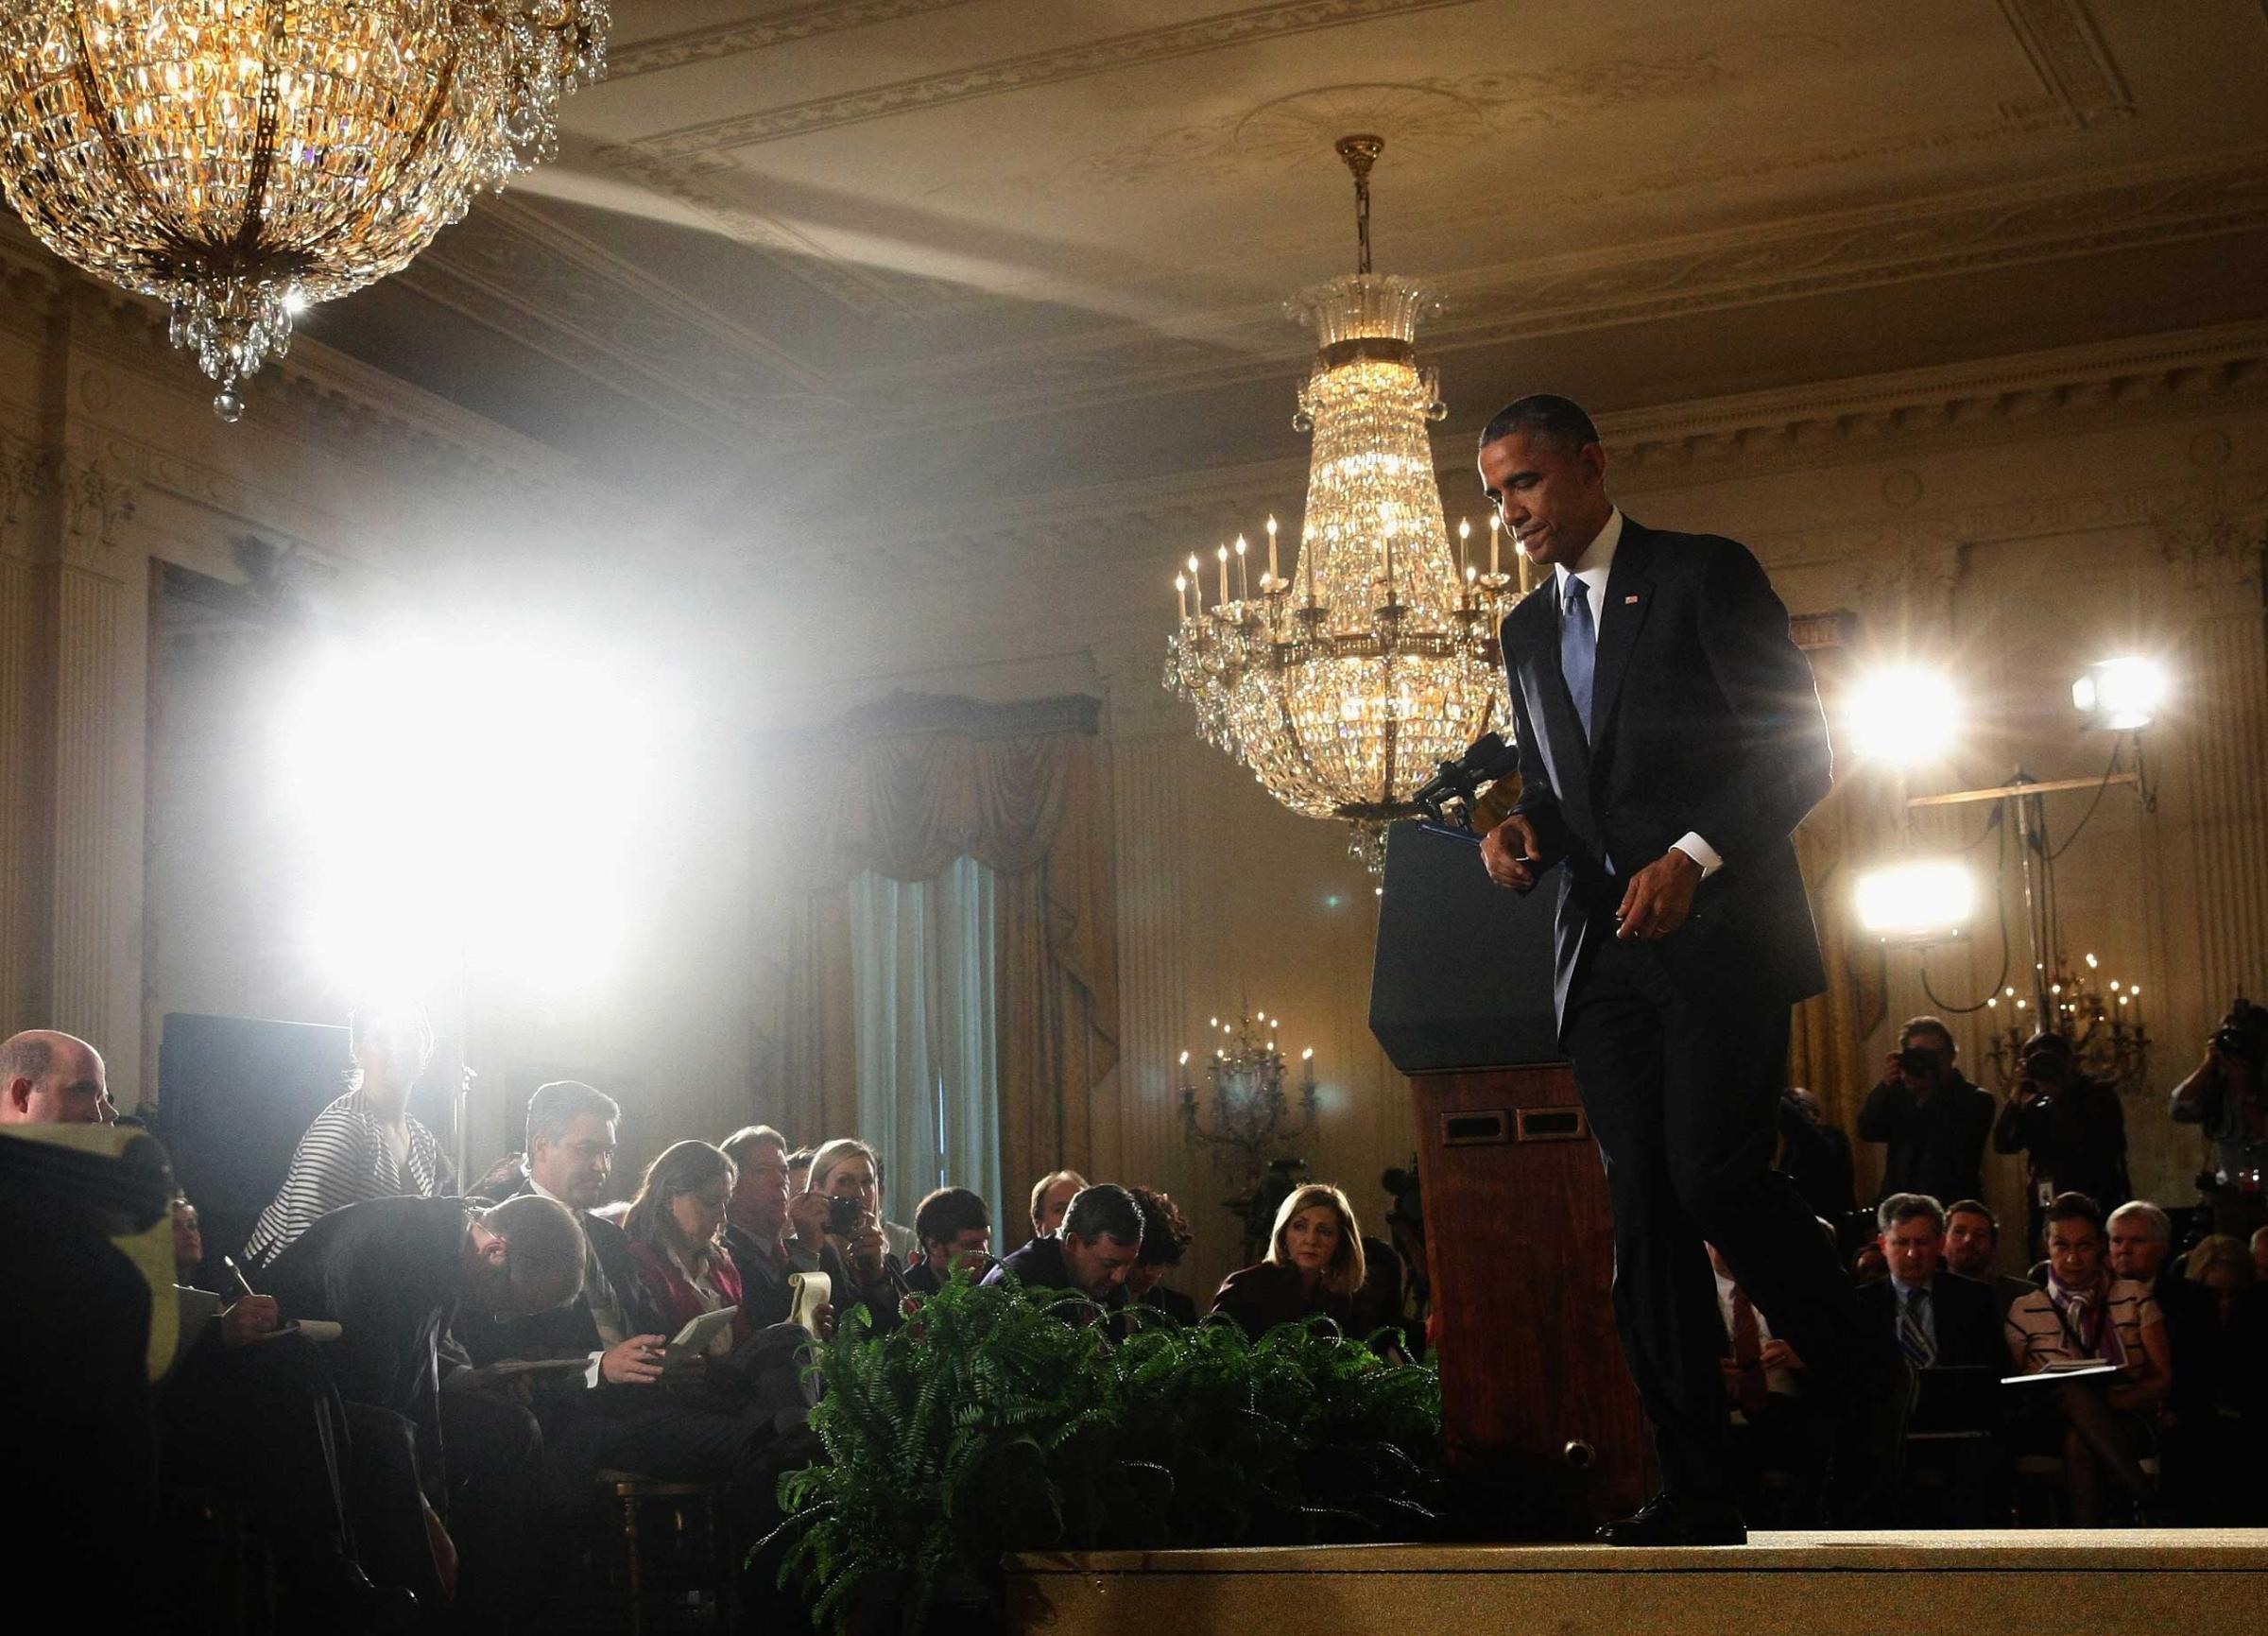 President Obama Holds A News Conference Day After Midterm Elections